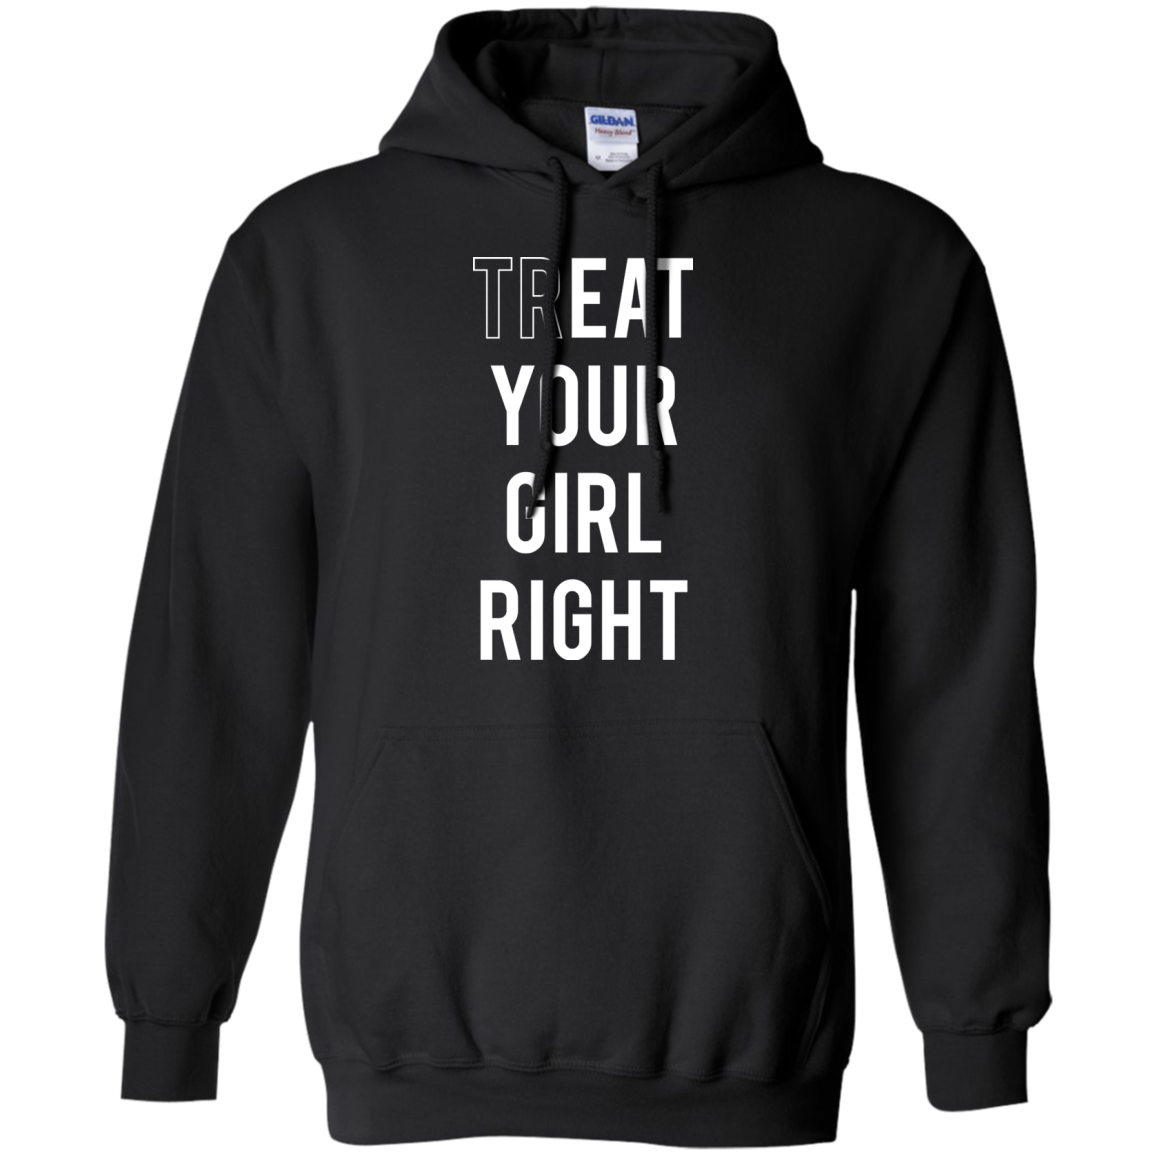 black funny quoted hoodie for girls/women/lesbian